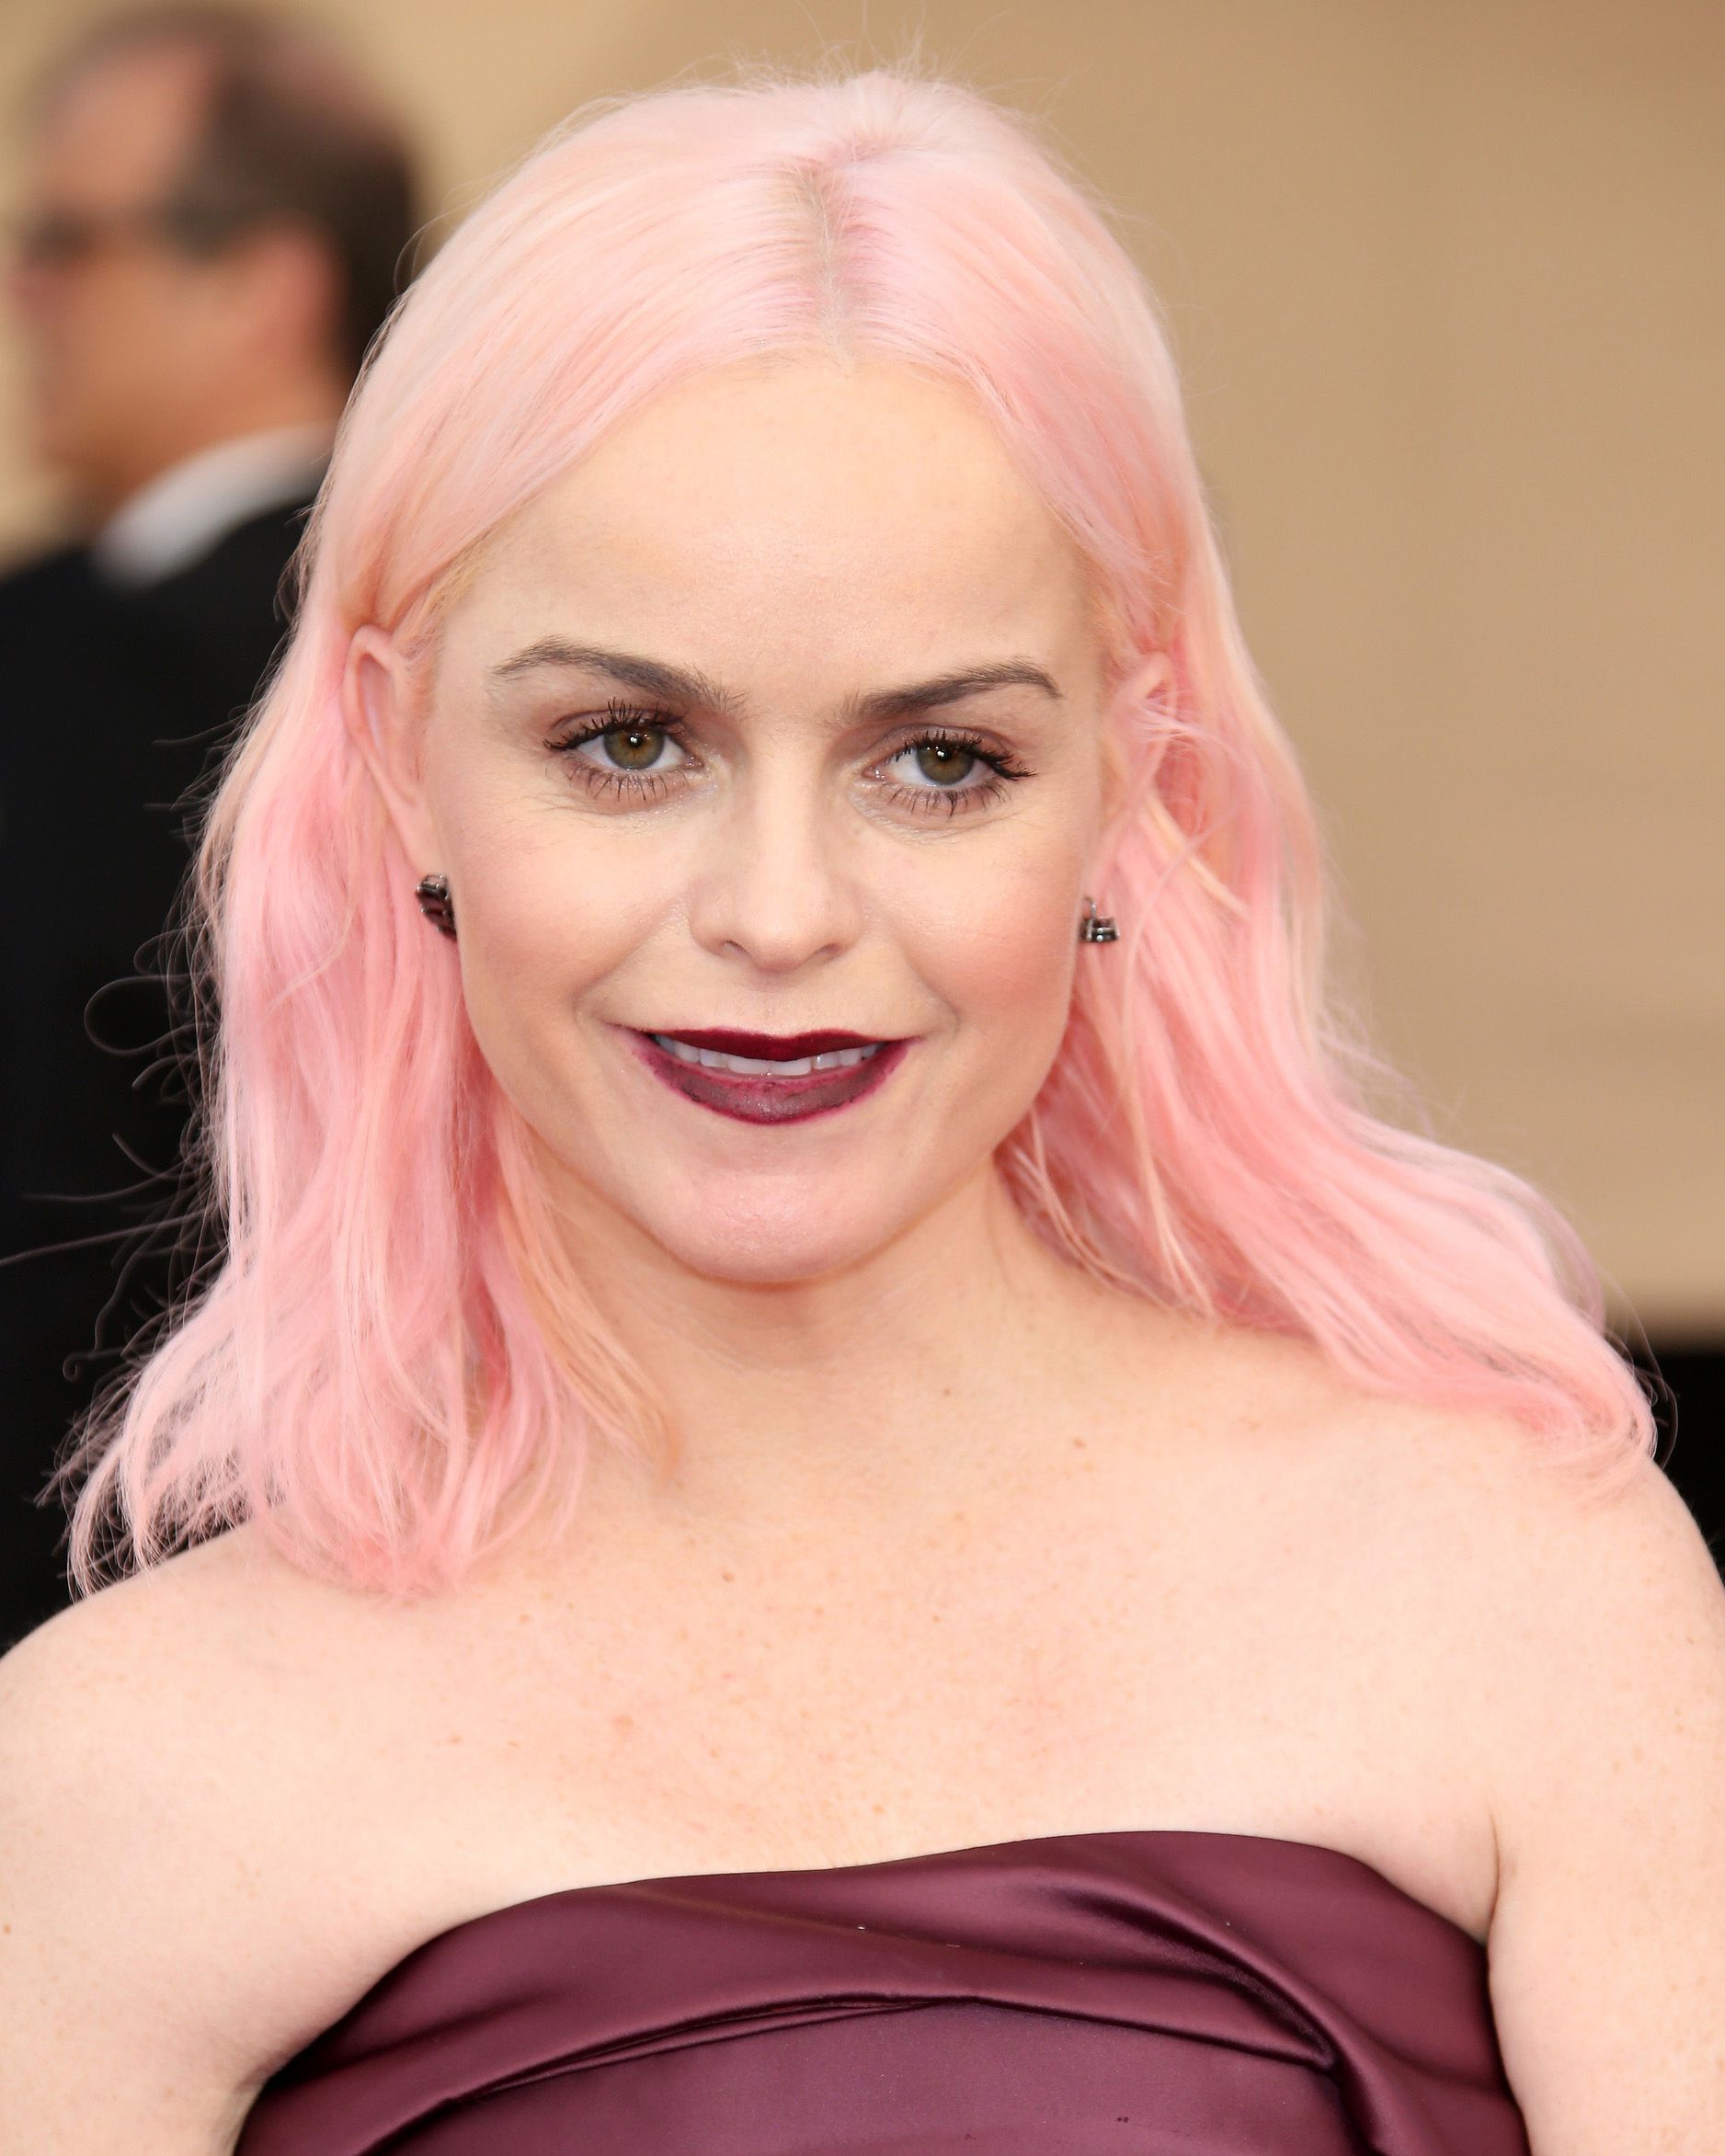 11 Pastel Pink Hair Pics For Your Next Candyfloss-Coloured 'Do